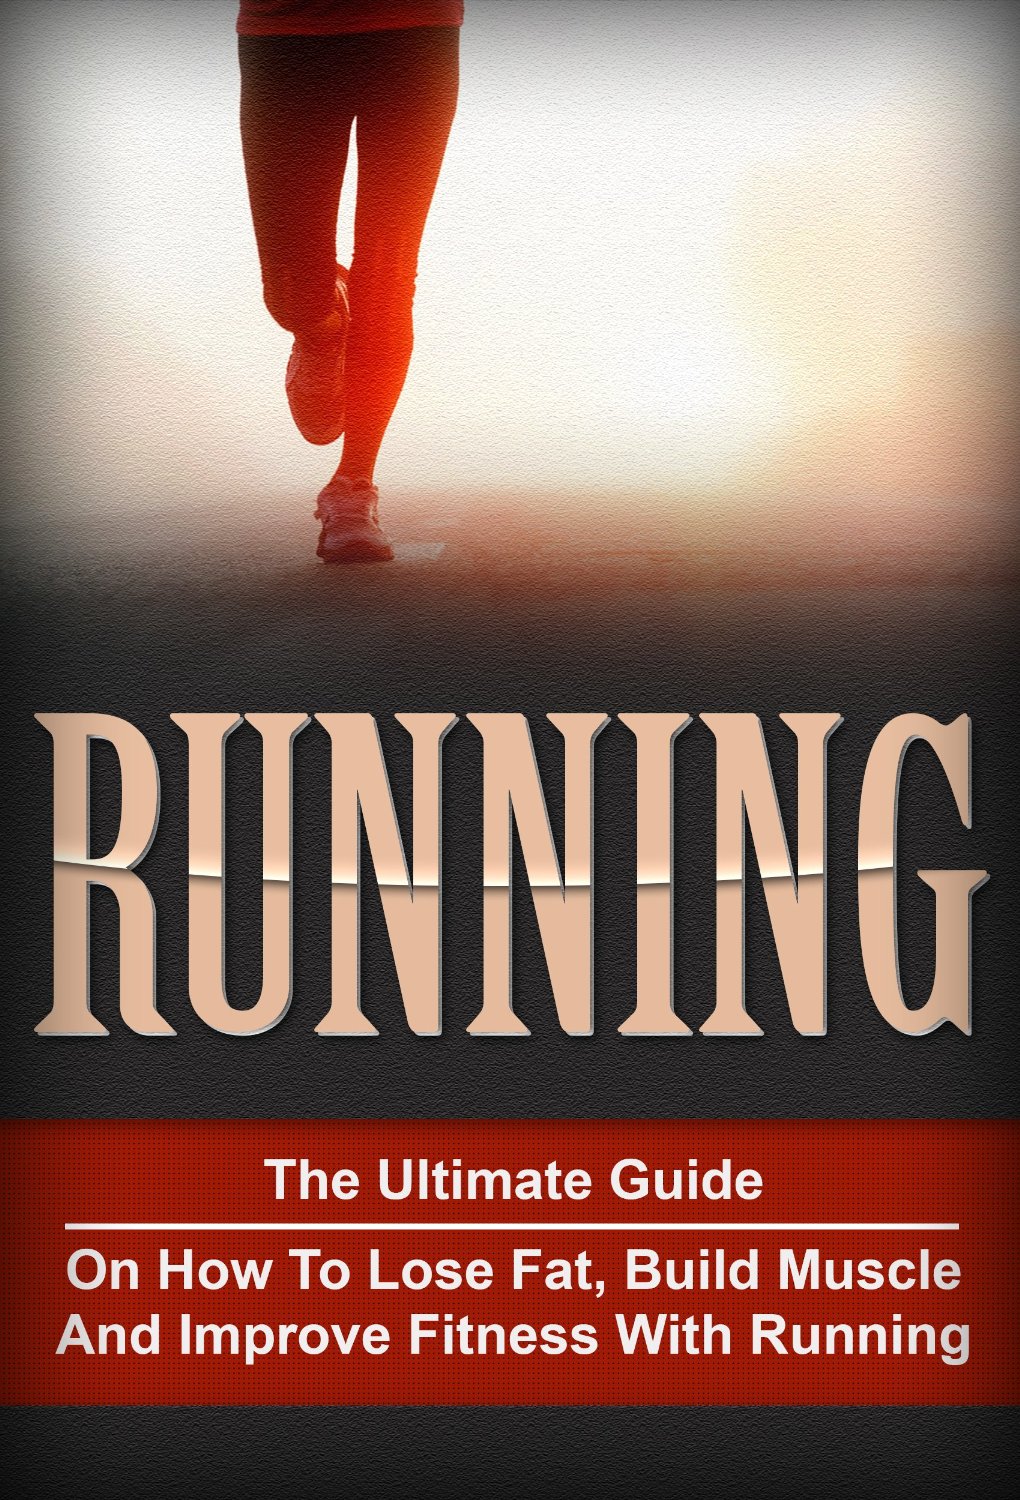 Running: The Ultimate Guide On How To Lose Fat, Build Muscle And Improve Fitness With Running (Running, Cardio, Fitness) [Kindle Edition] by Mike Kane